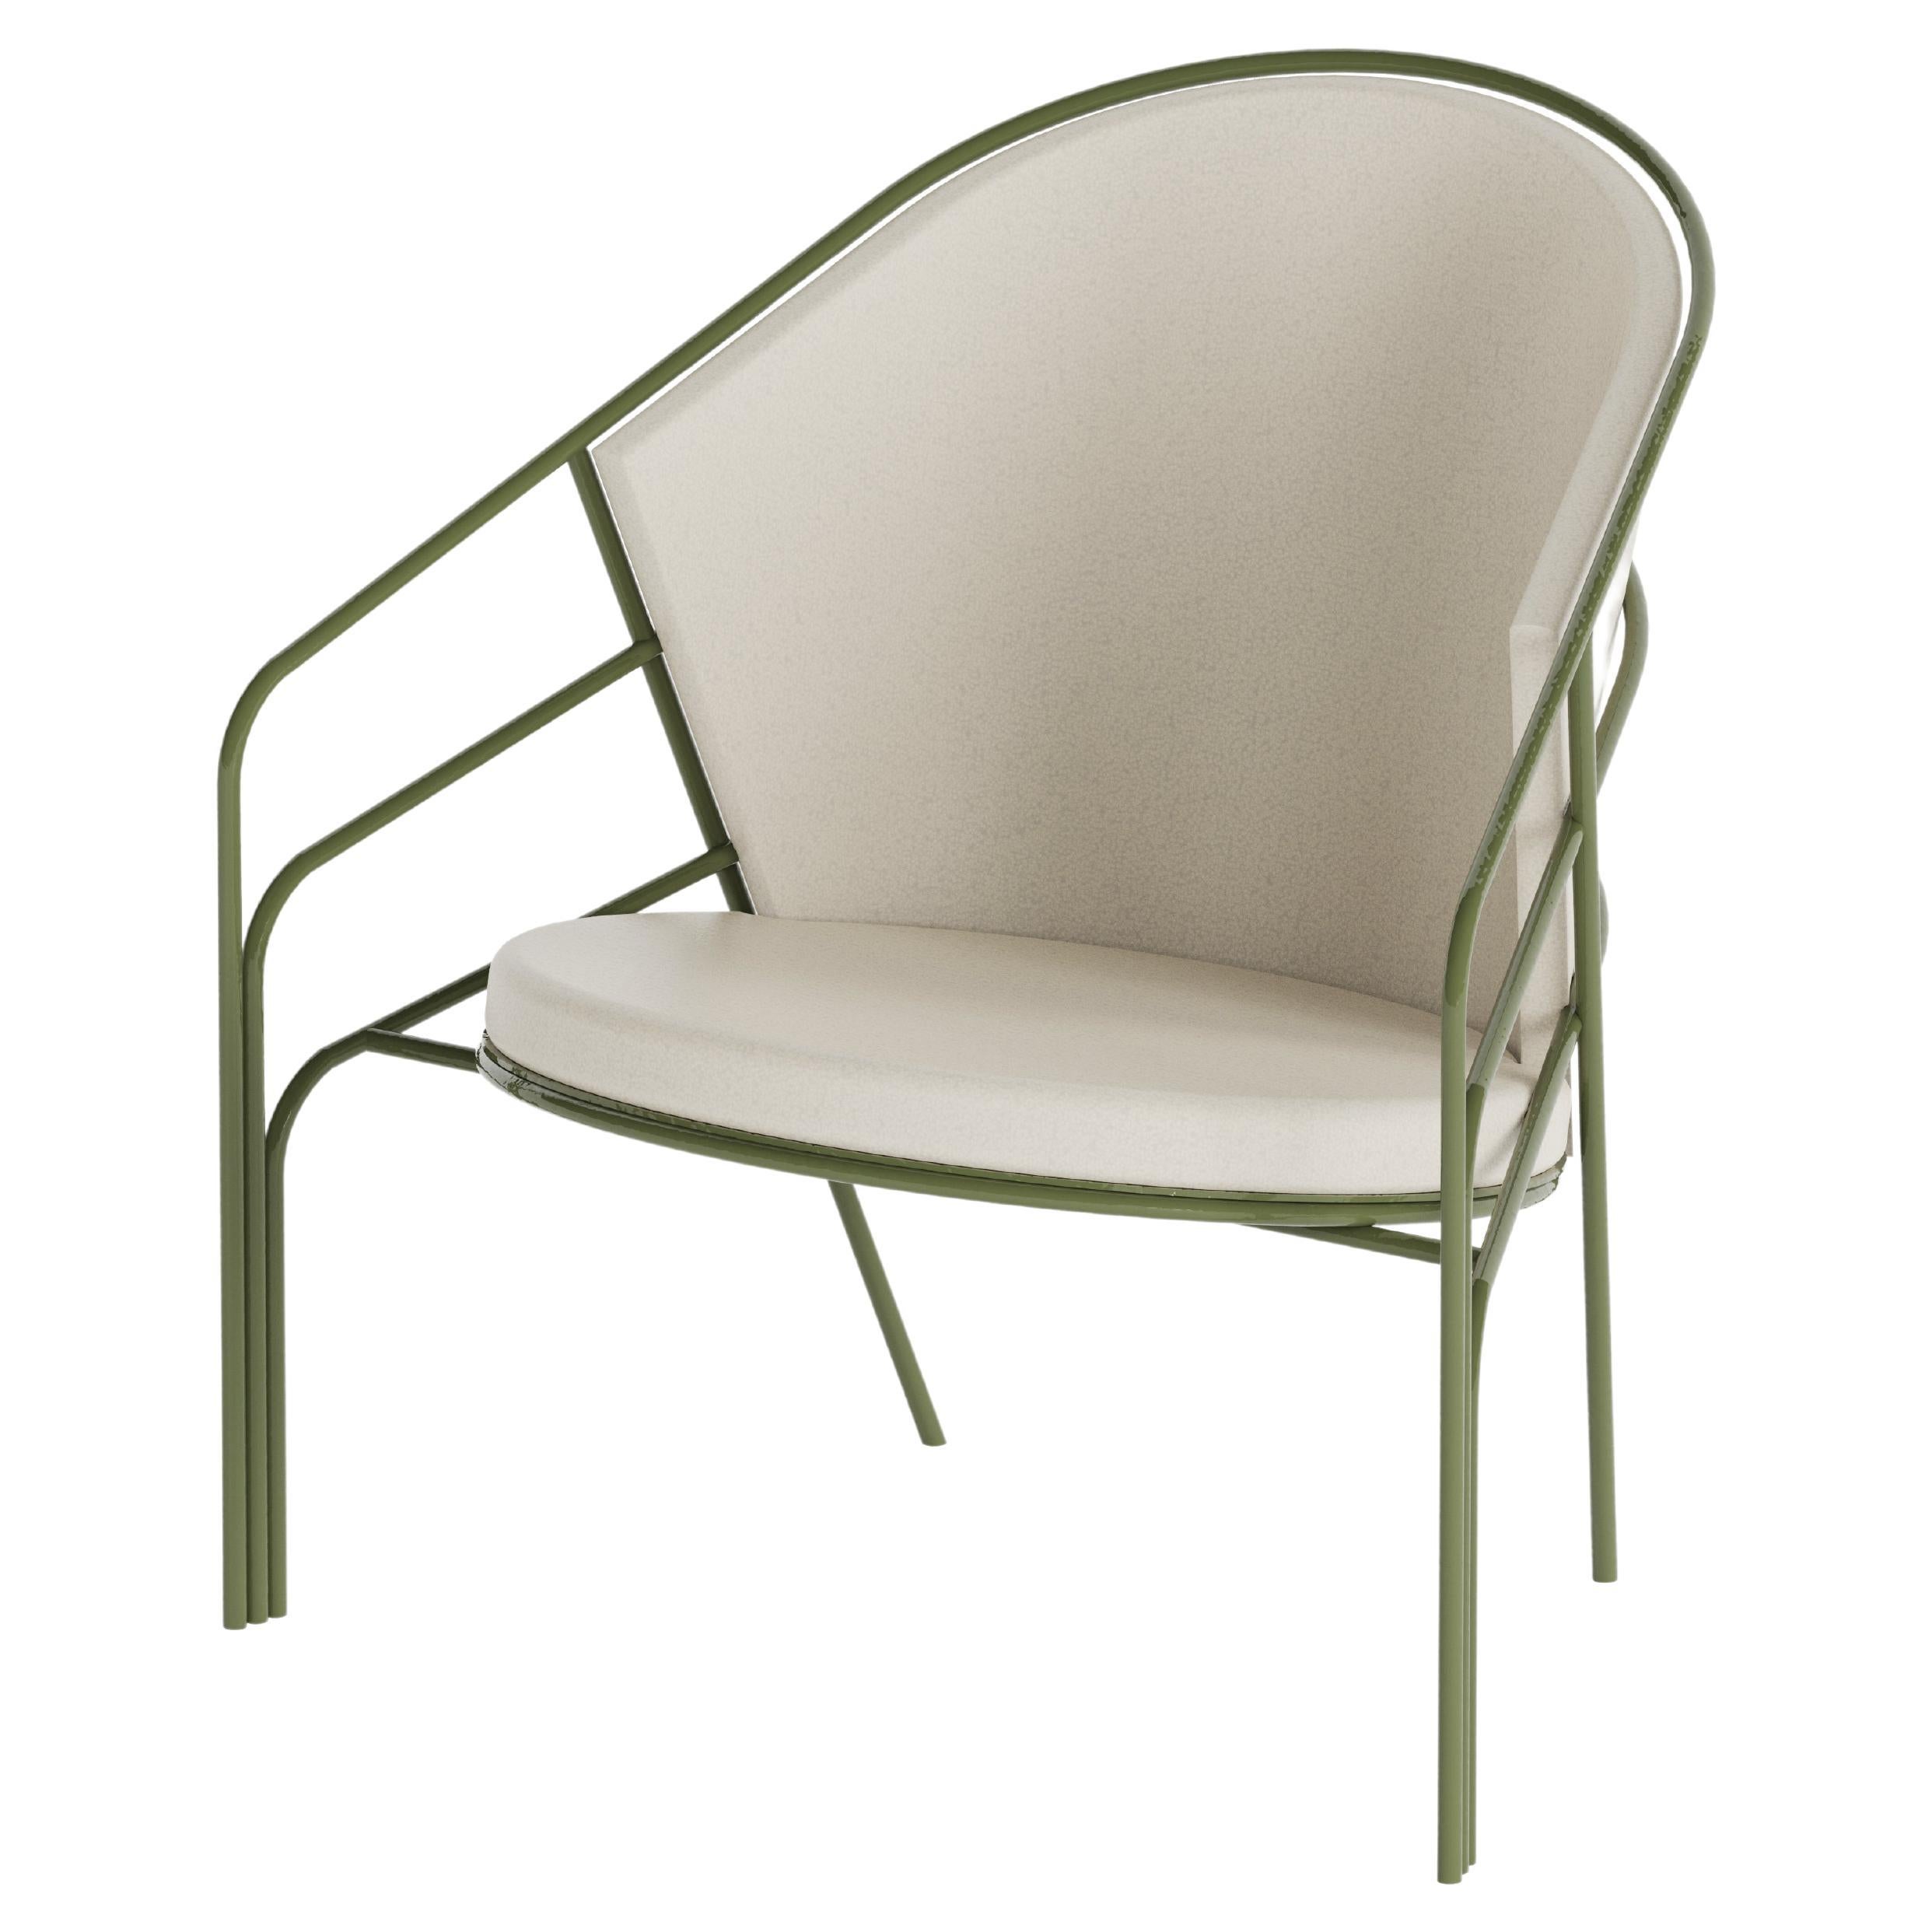 DeMille Outdoor Lounge Chair in Sage Powder-Coat with Cream Cushions For Sale